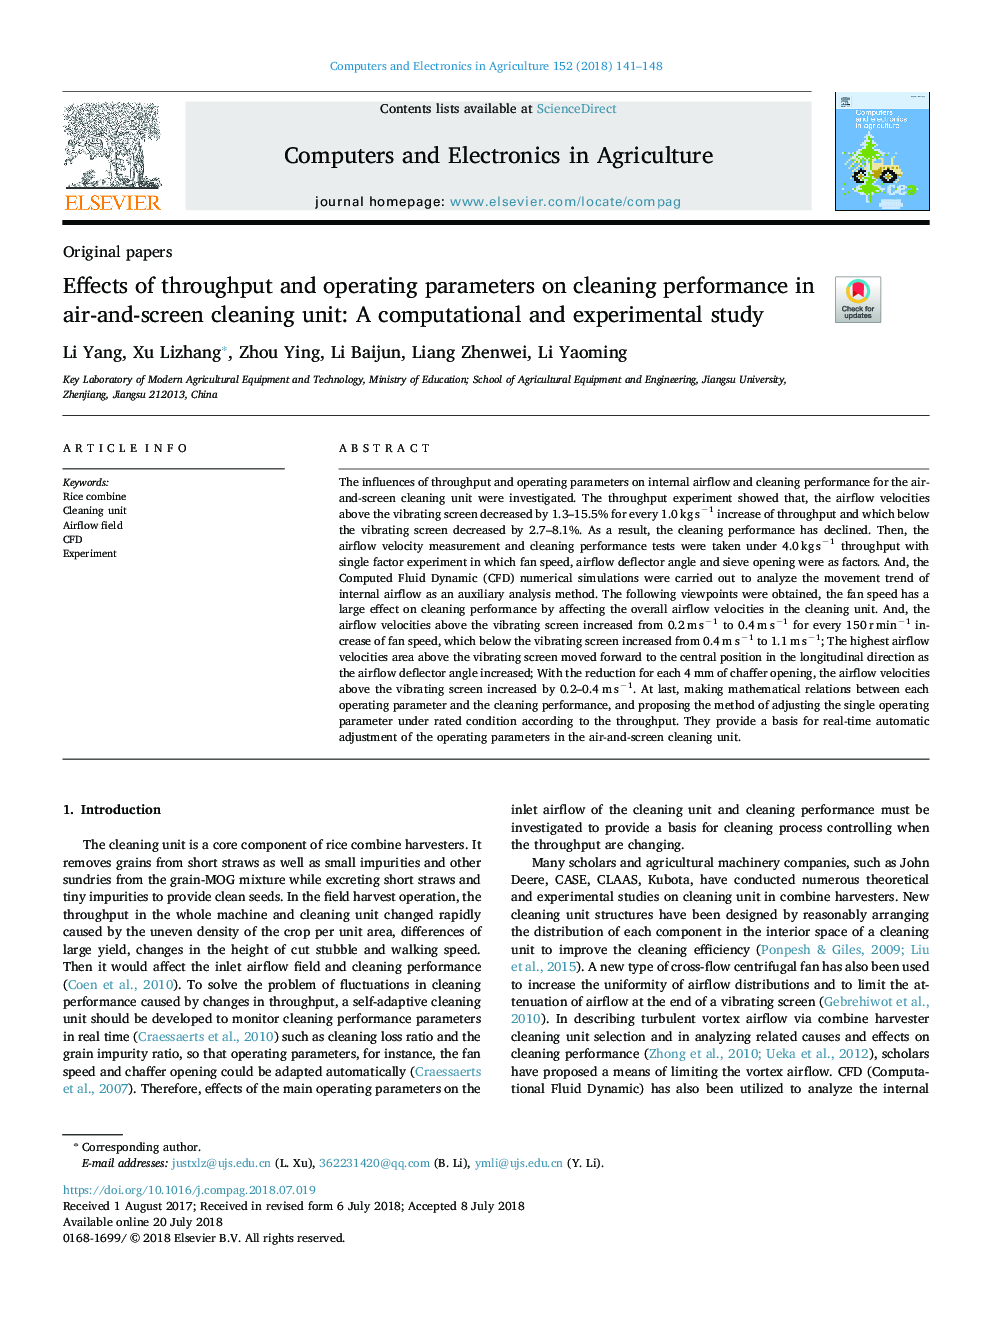 Effects of throughput and operating parameters on cleaning performance in air-and-screen cleaning unit: A computational and experimental study